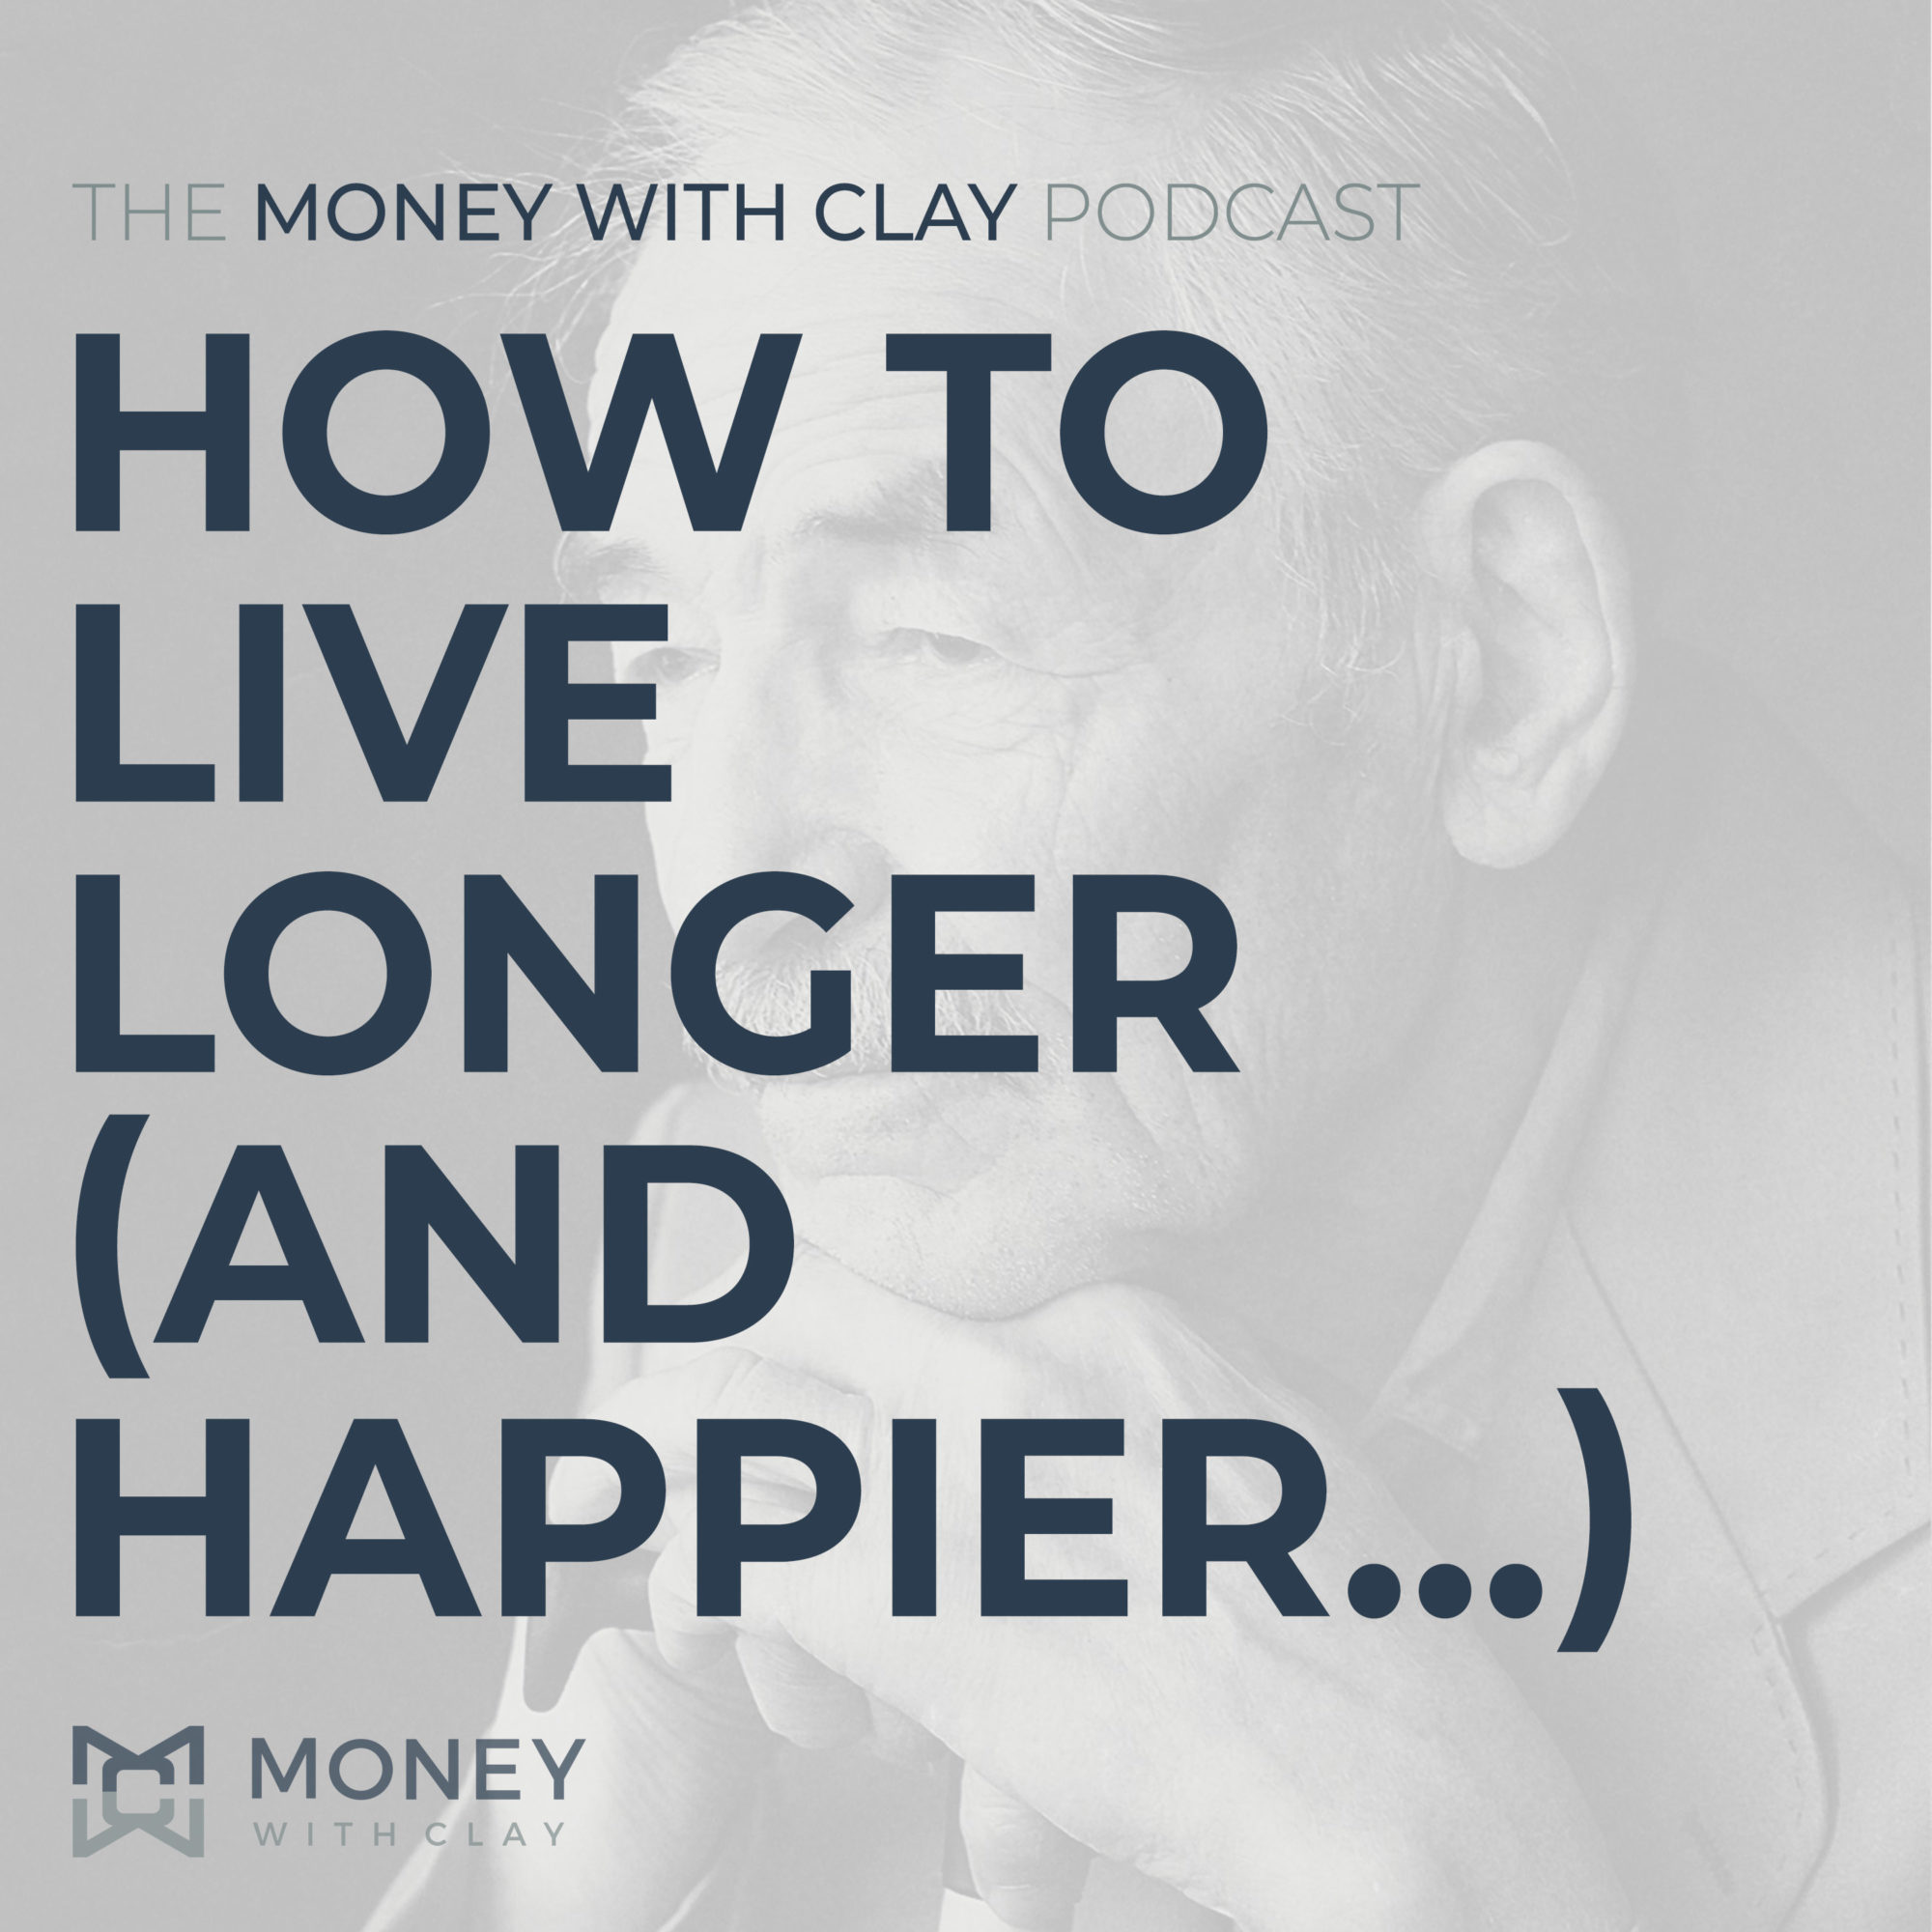 How to Live Longer (and happier...) | #114